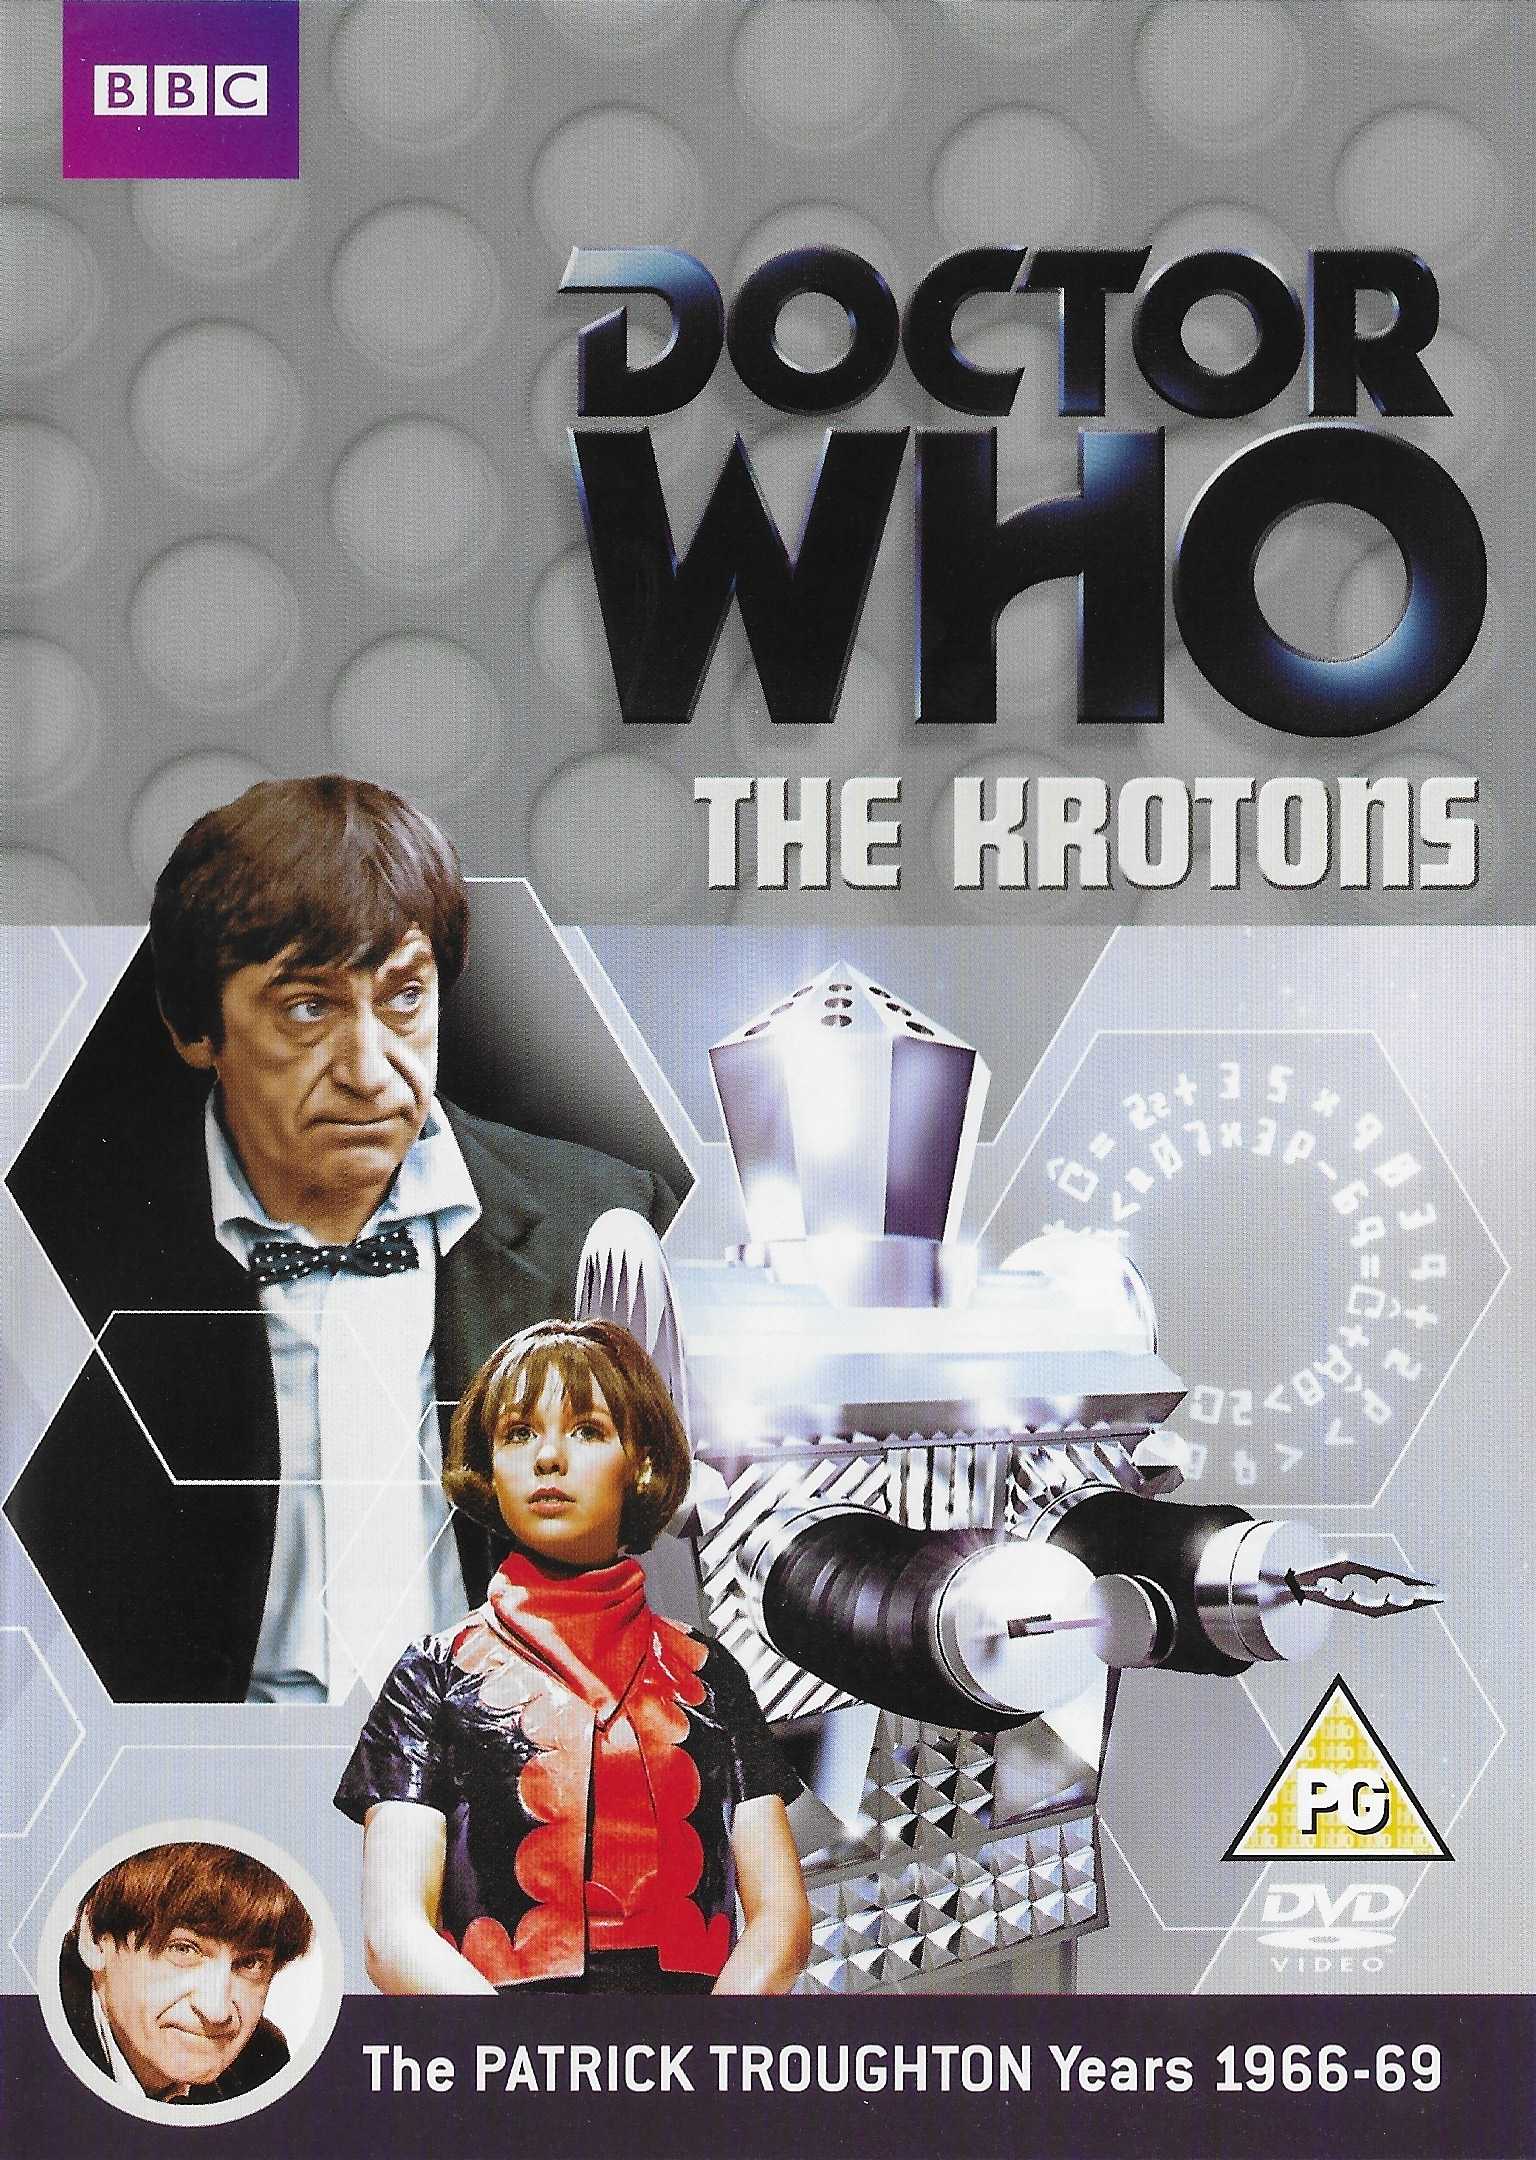 Picture of BBCDVD 3480 Doctor Who - The Krotons by artist Robert Holmes from the BBC records and Tapes library